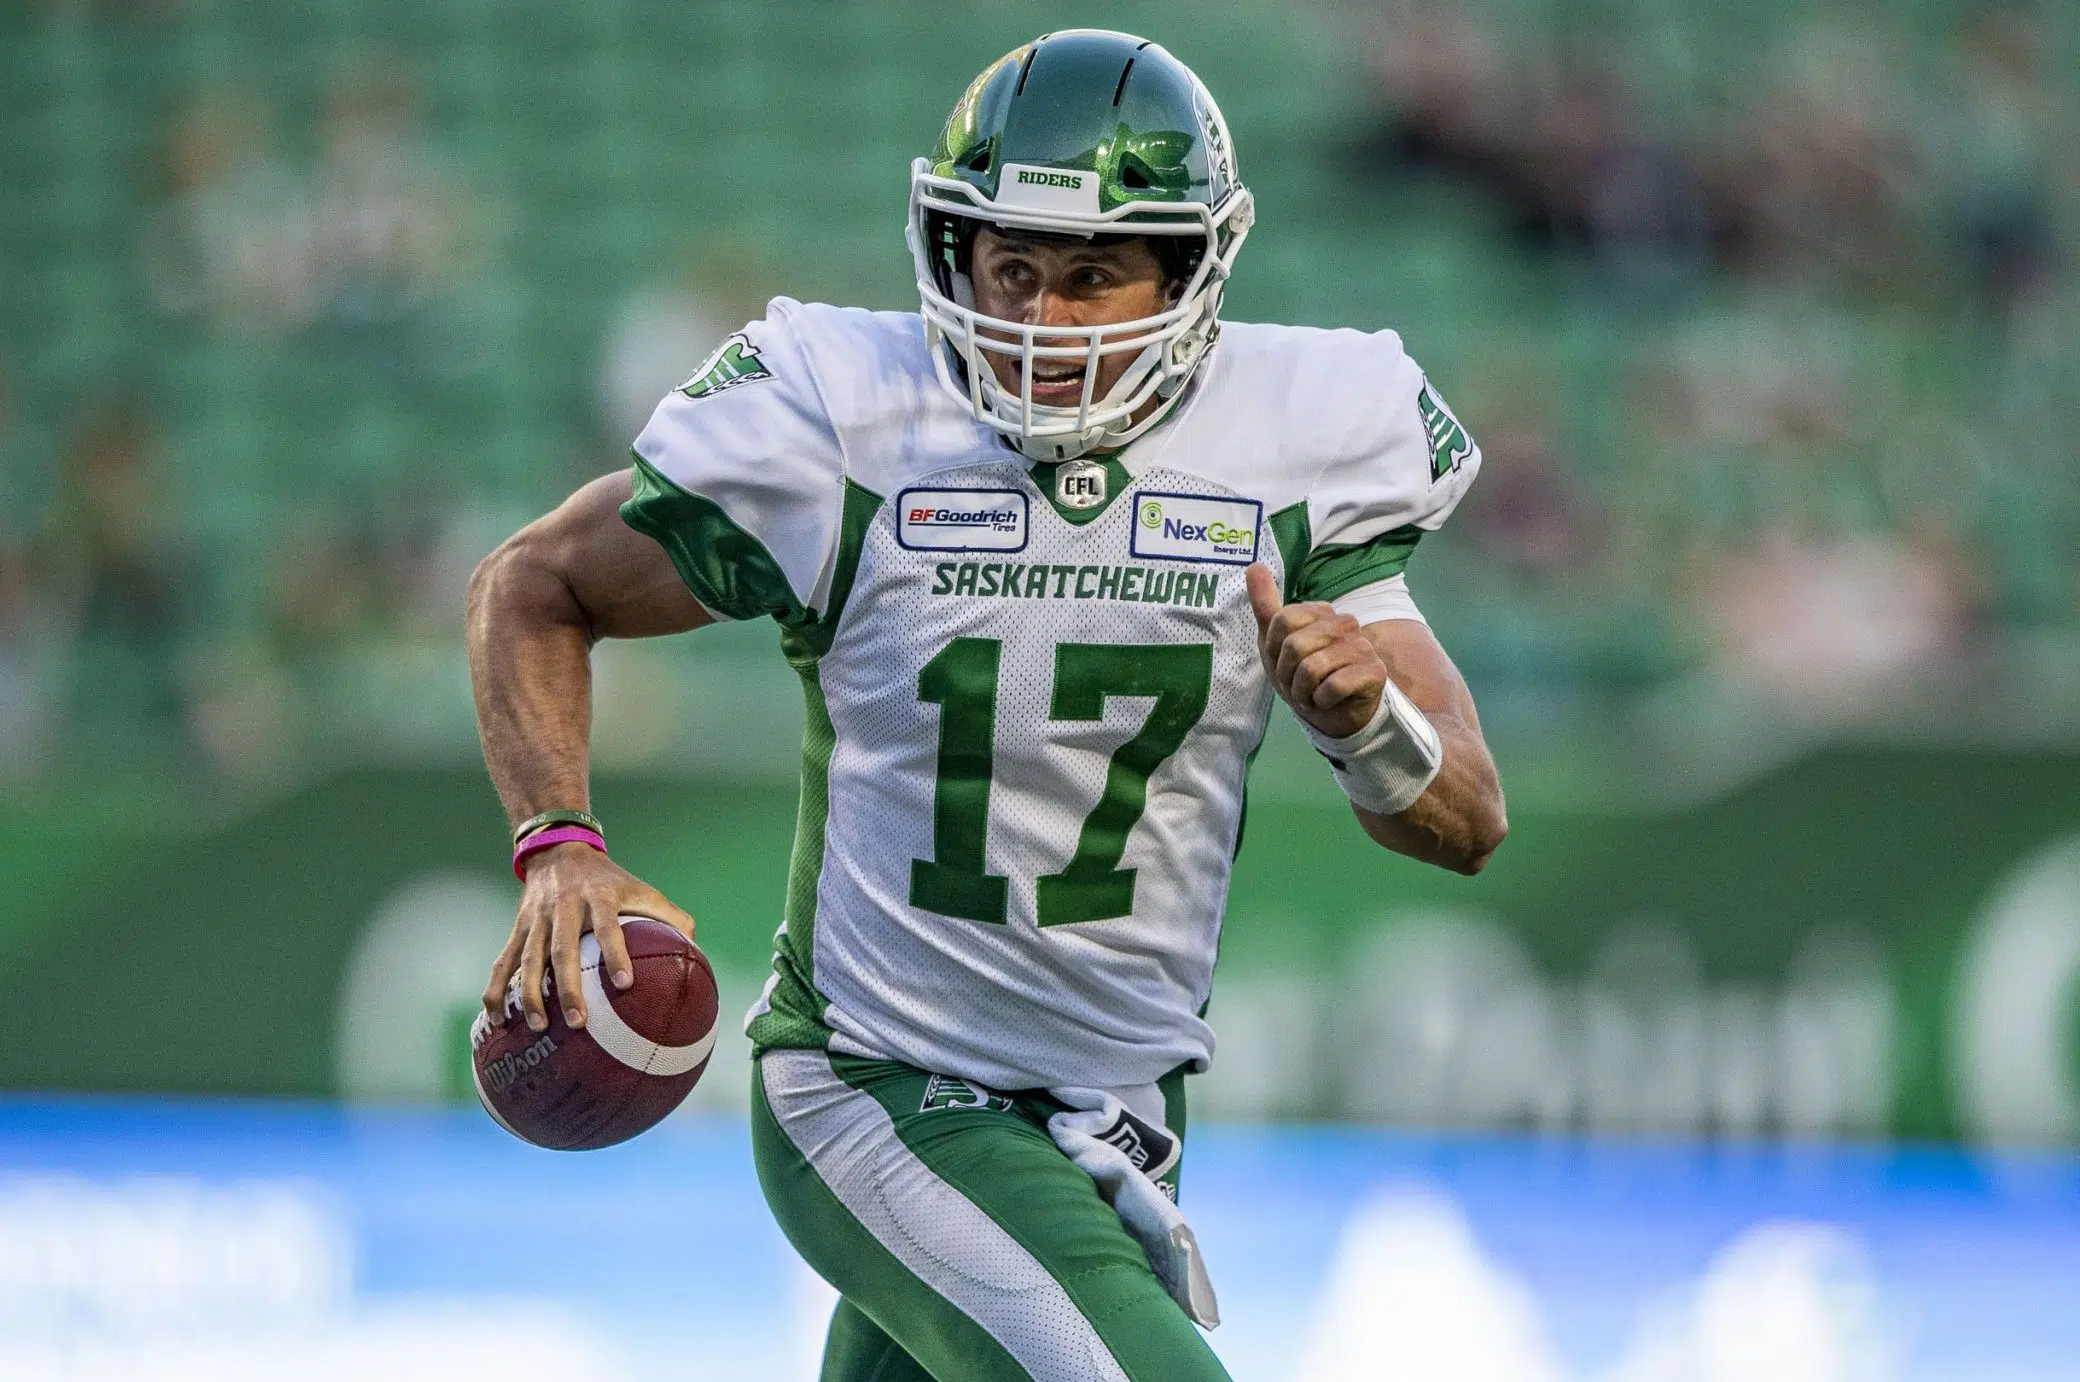 Collaros excited to play against former Hamilton teammates